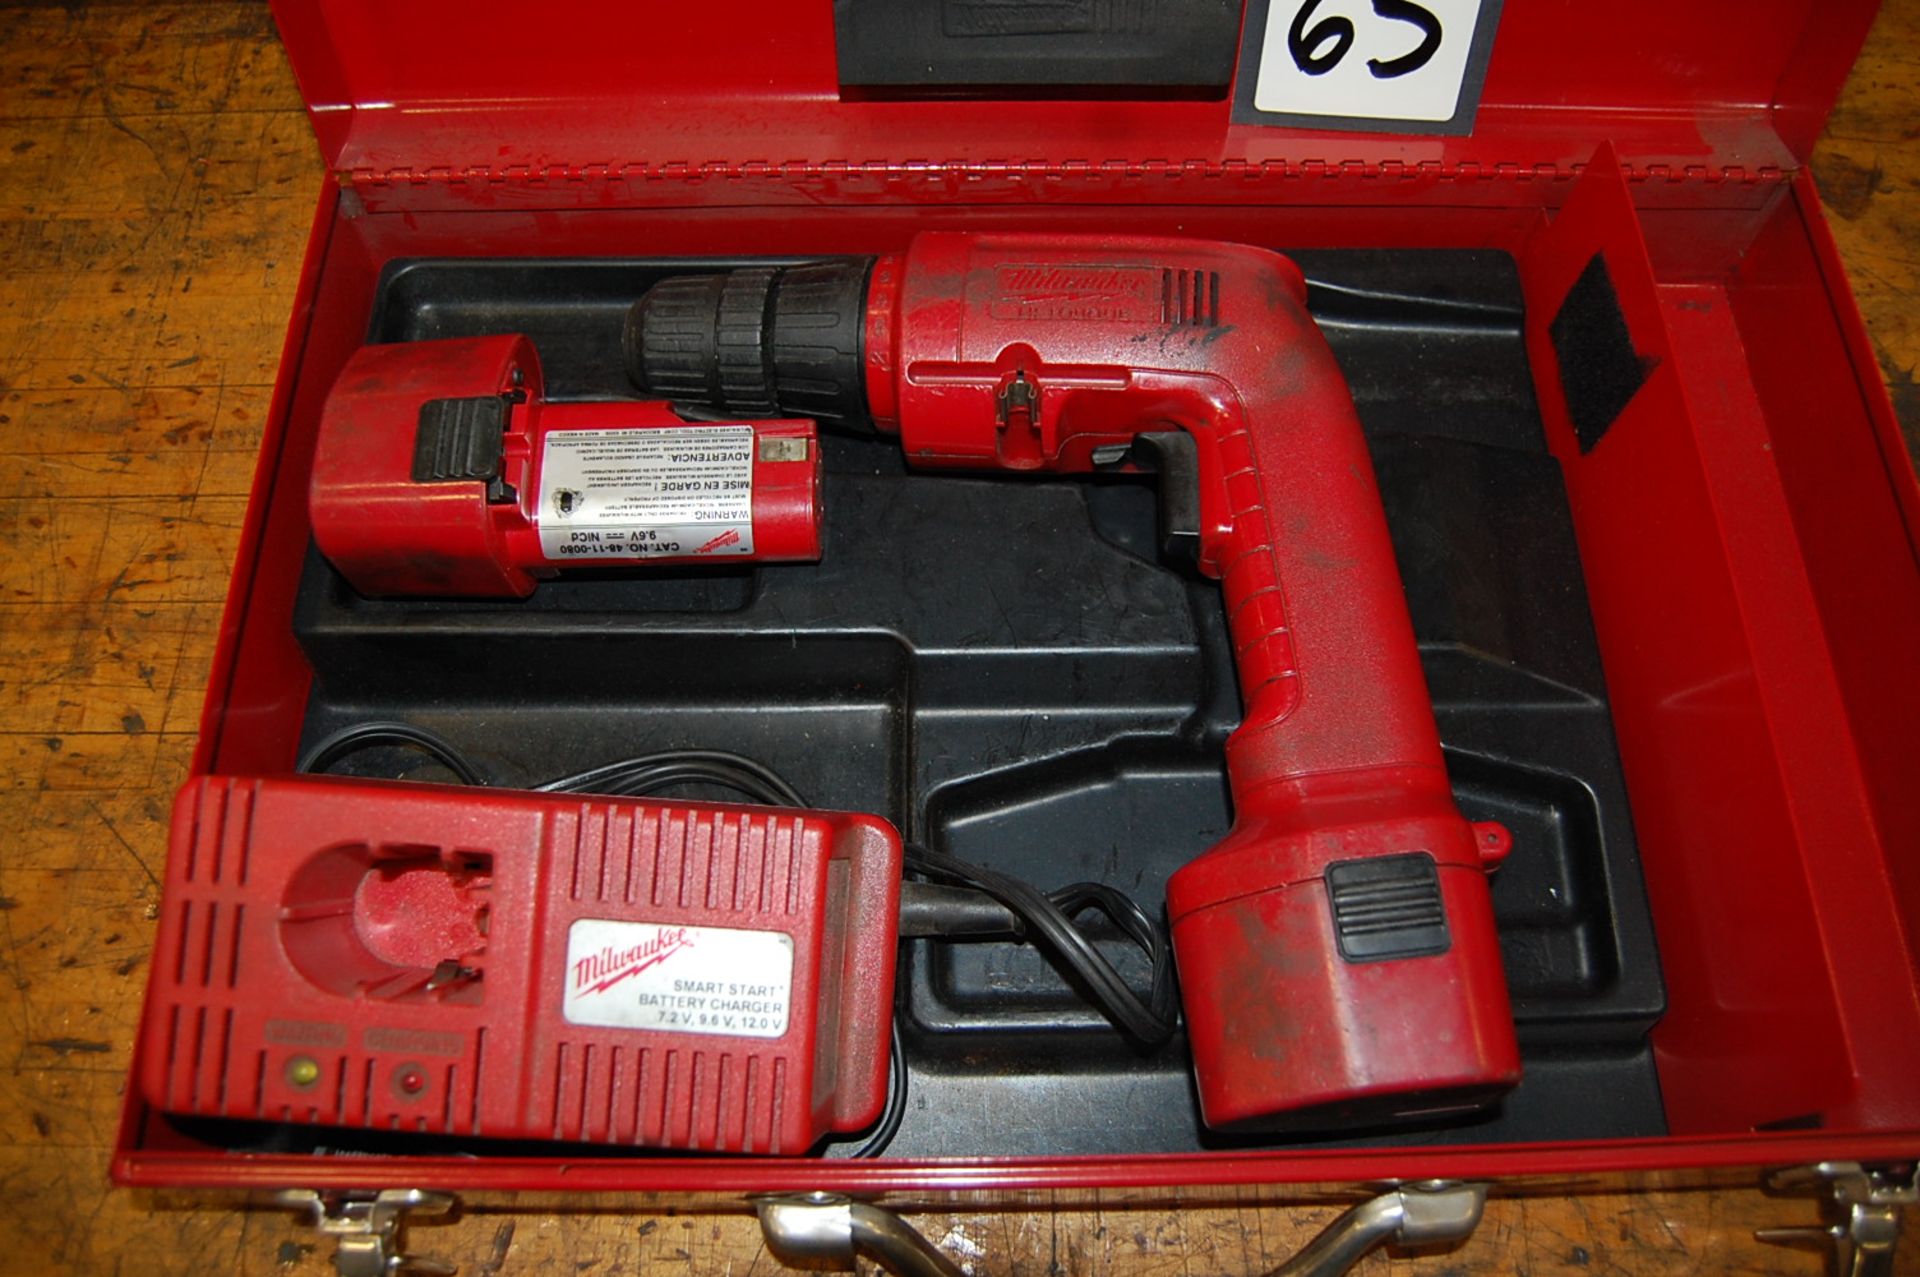 Milwaukee Cat # 0396-1 Cordless 3/8" Driver Drill - Image 2 of 4